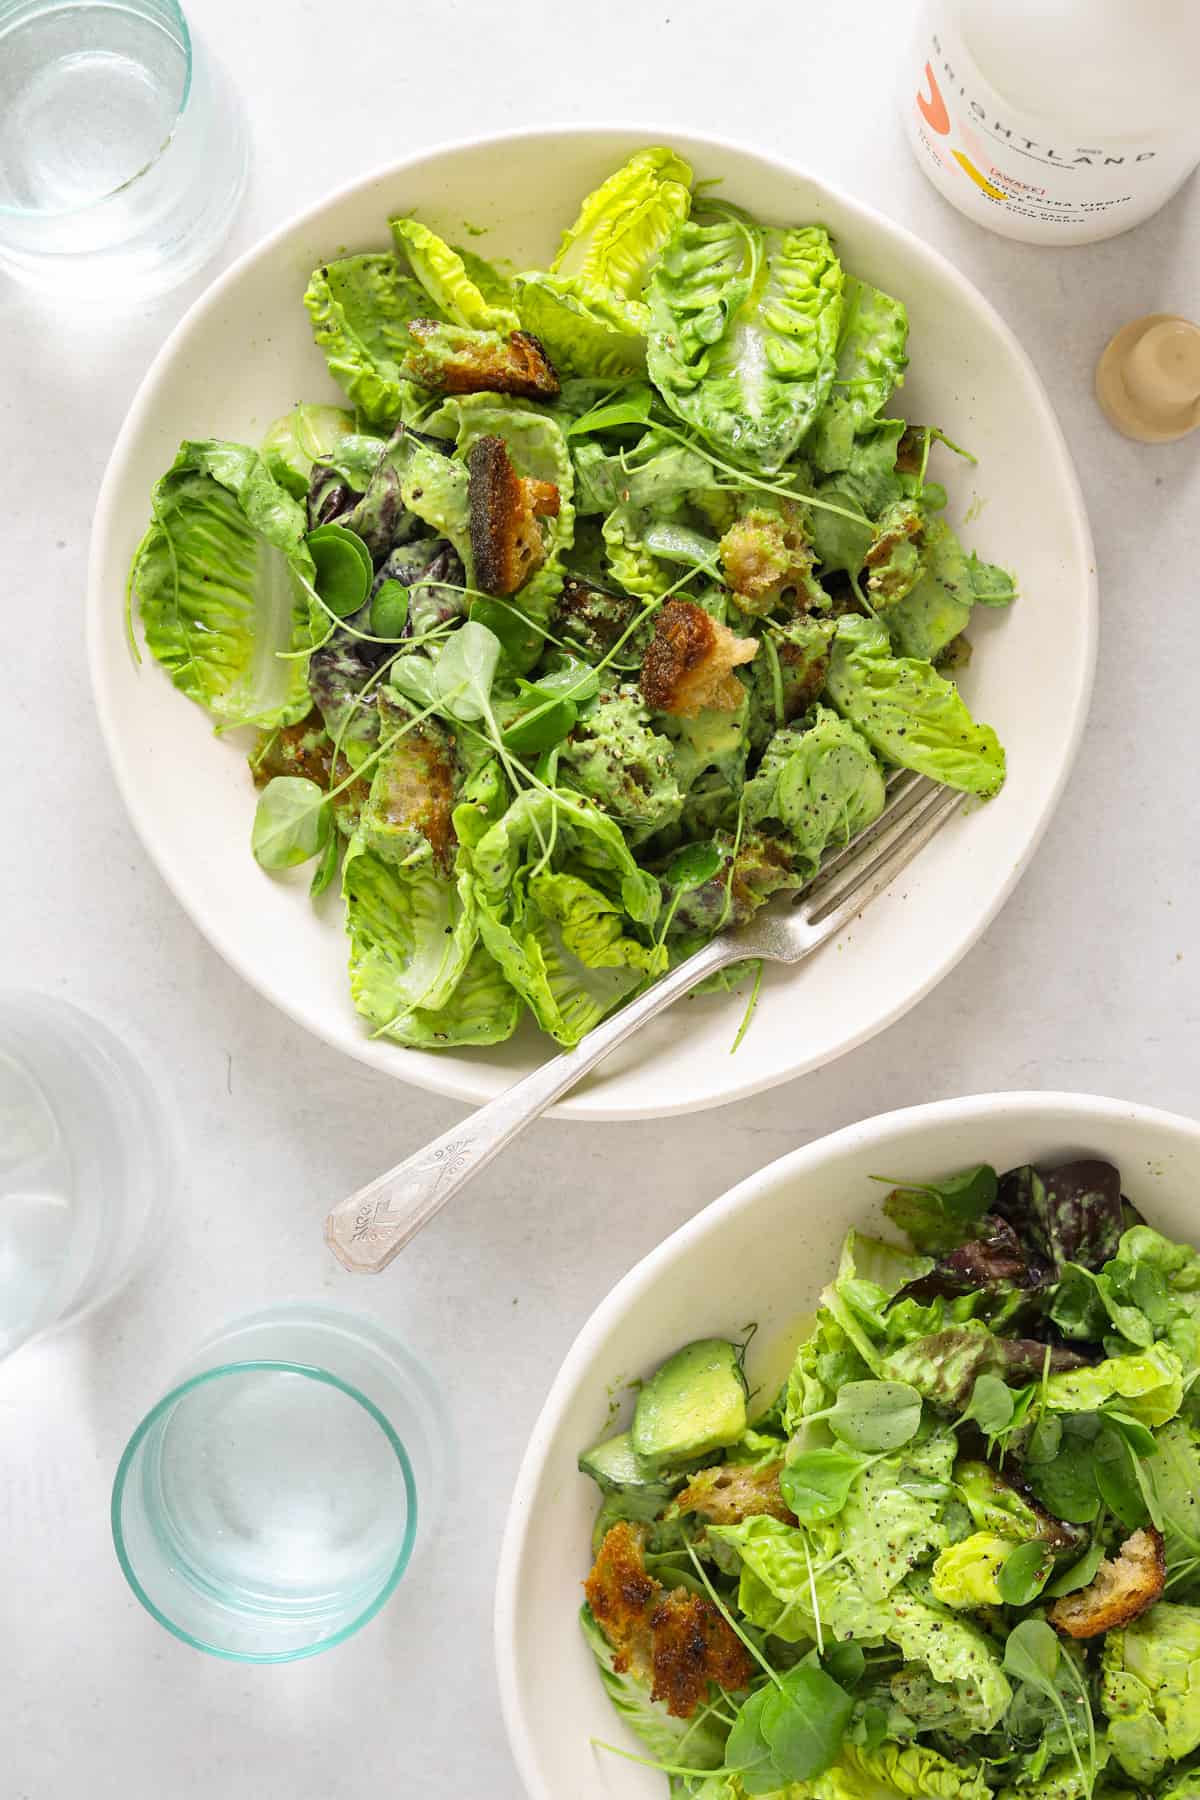 two white bowls full of lettuce, croutons, herbs and avocado. Three water glasses and a bottle of olive oil.